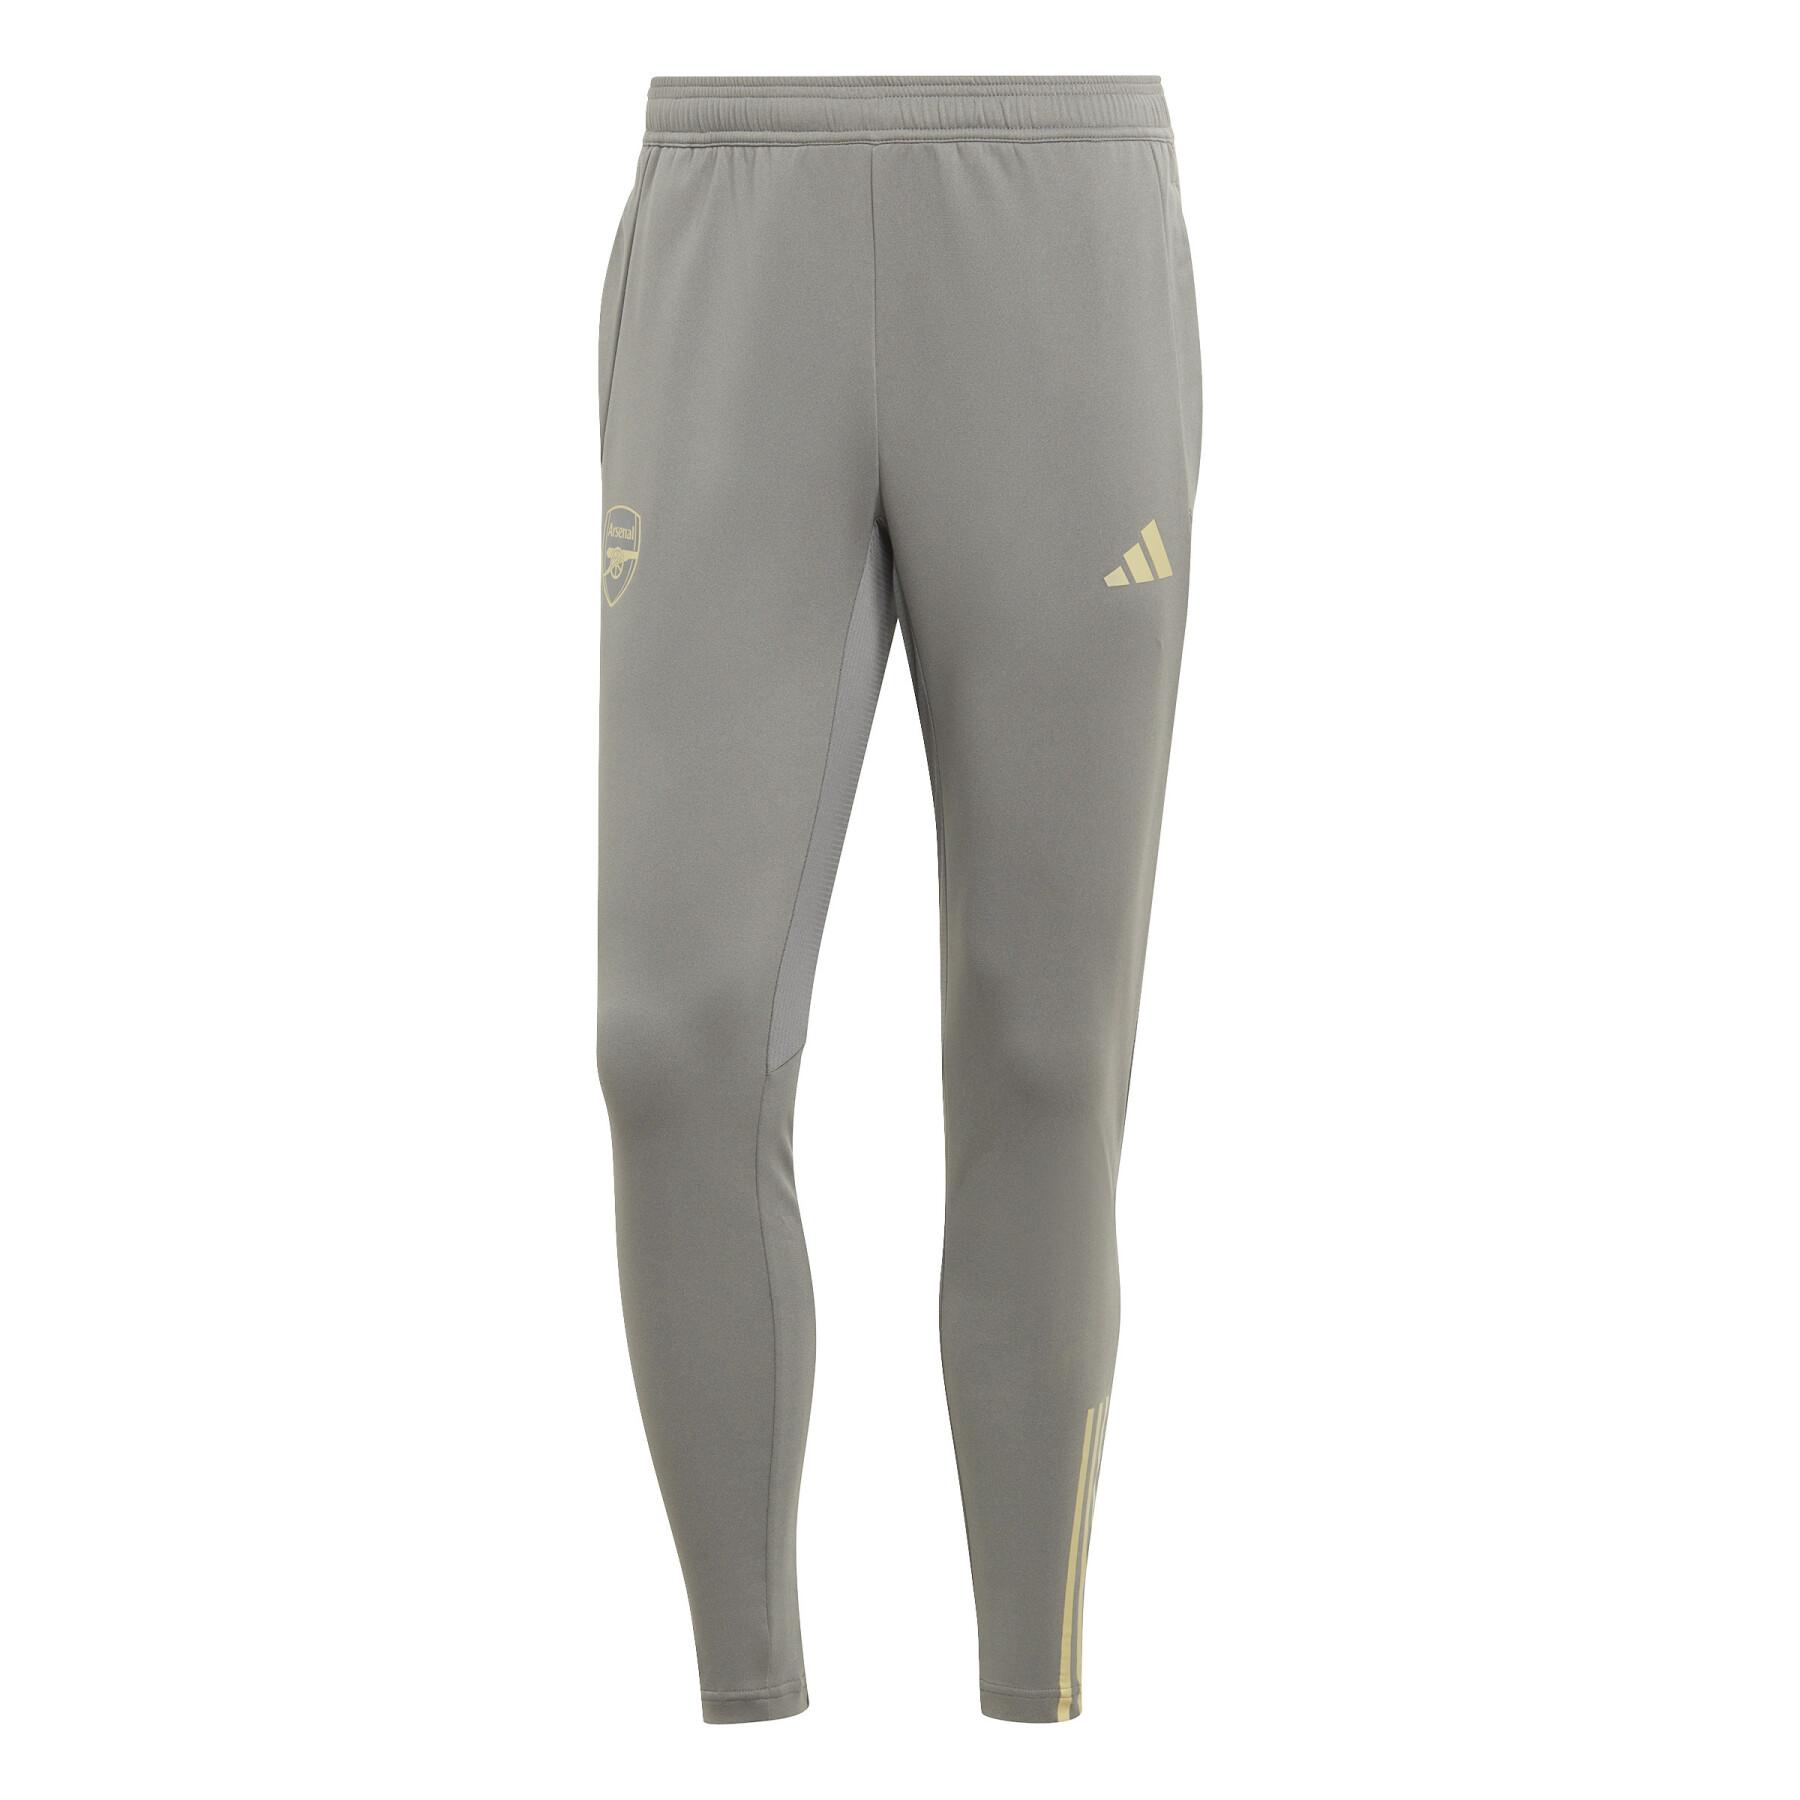 https://media.foot-store.com/catalog/product/cache/image/1800x/9df78eab33525d08d6e5fb8d27136e95/a/d/adidas_ij7795_2_apparel_photography_front_center_view_white.jpg